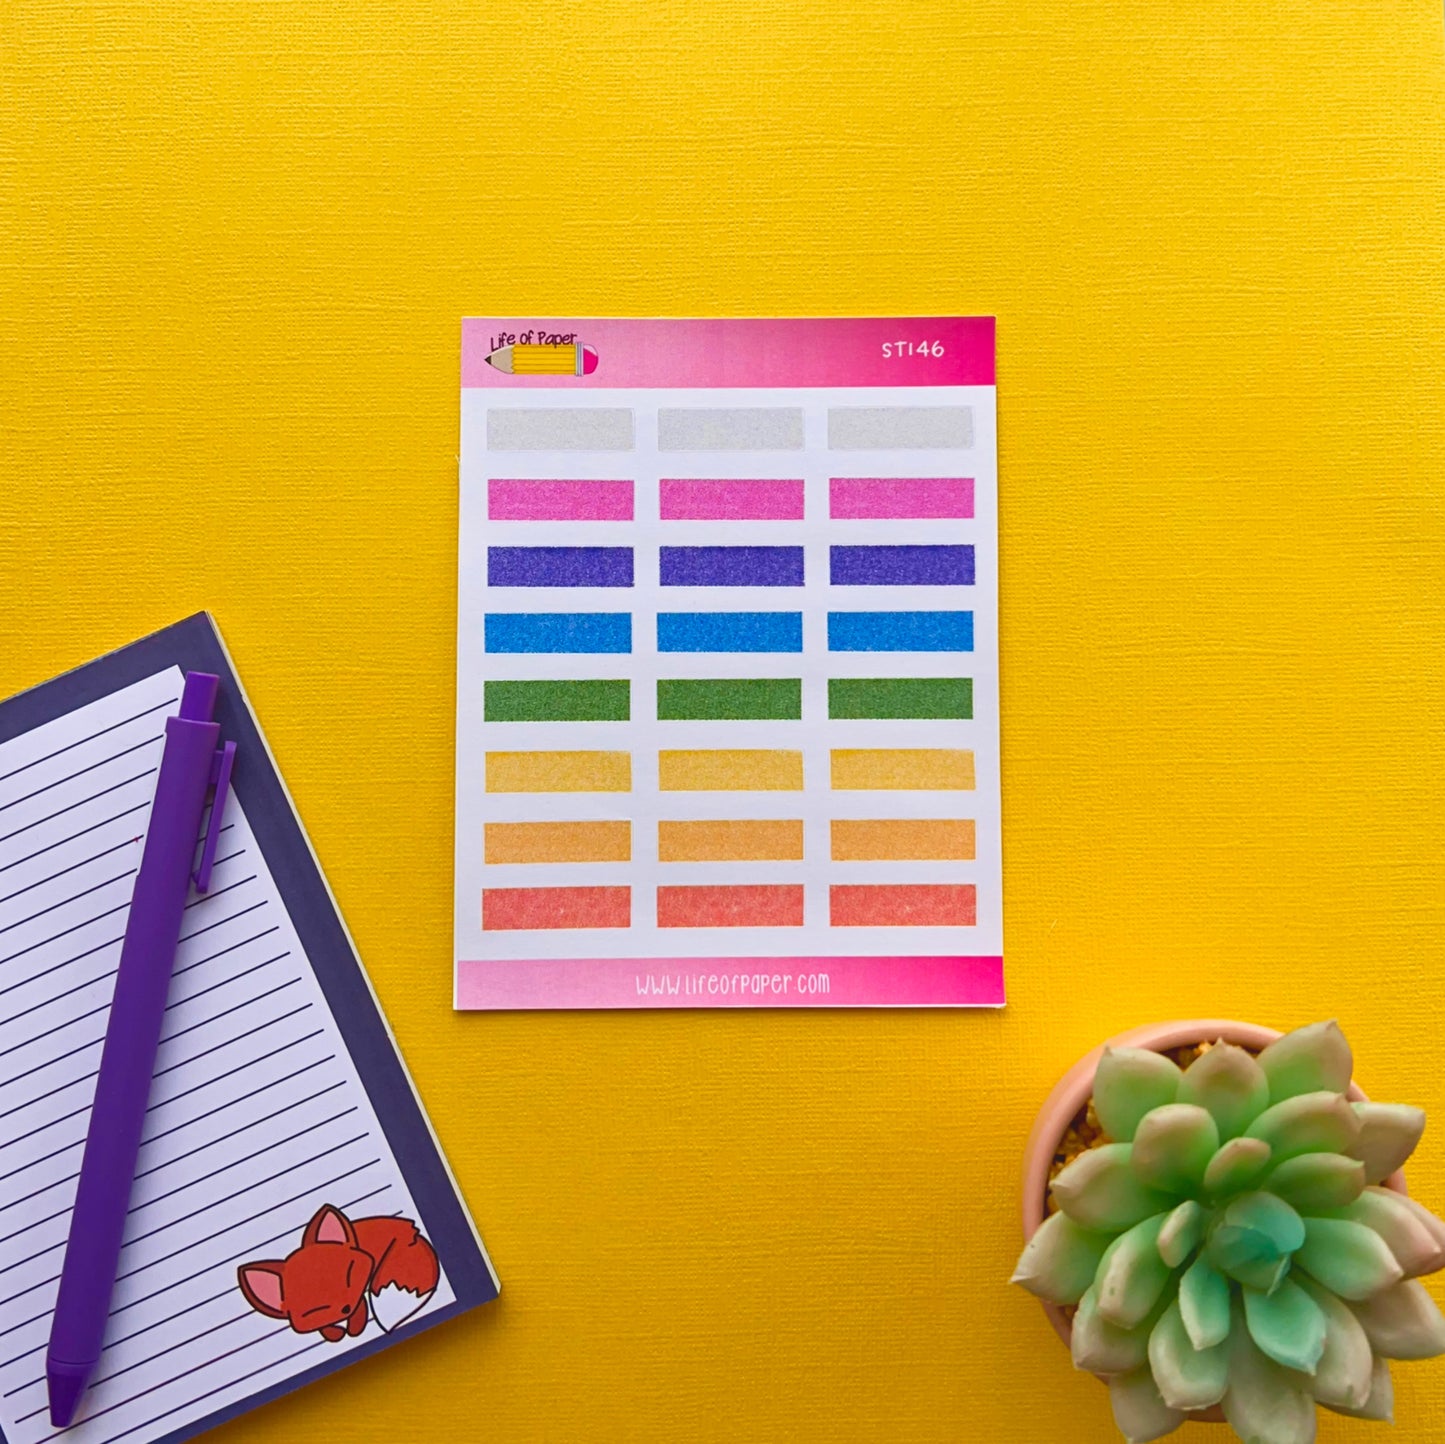 A sheet of Textured Box Planner Stickers with 30 labels arranged in a 5x6 grid is placed on a bright yellow background. To the left is a lined notepad with a purple pen, and a small sticker of a fox in the bottom corner. A succulent plant is on the right, perfect for organising your planner.